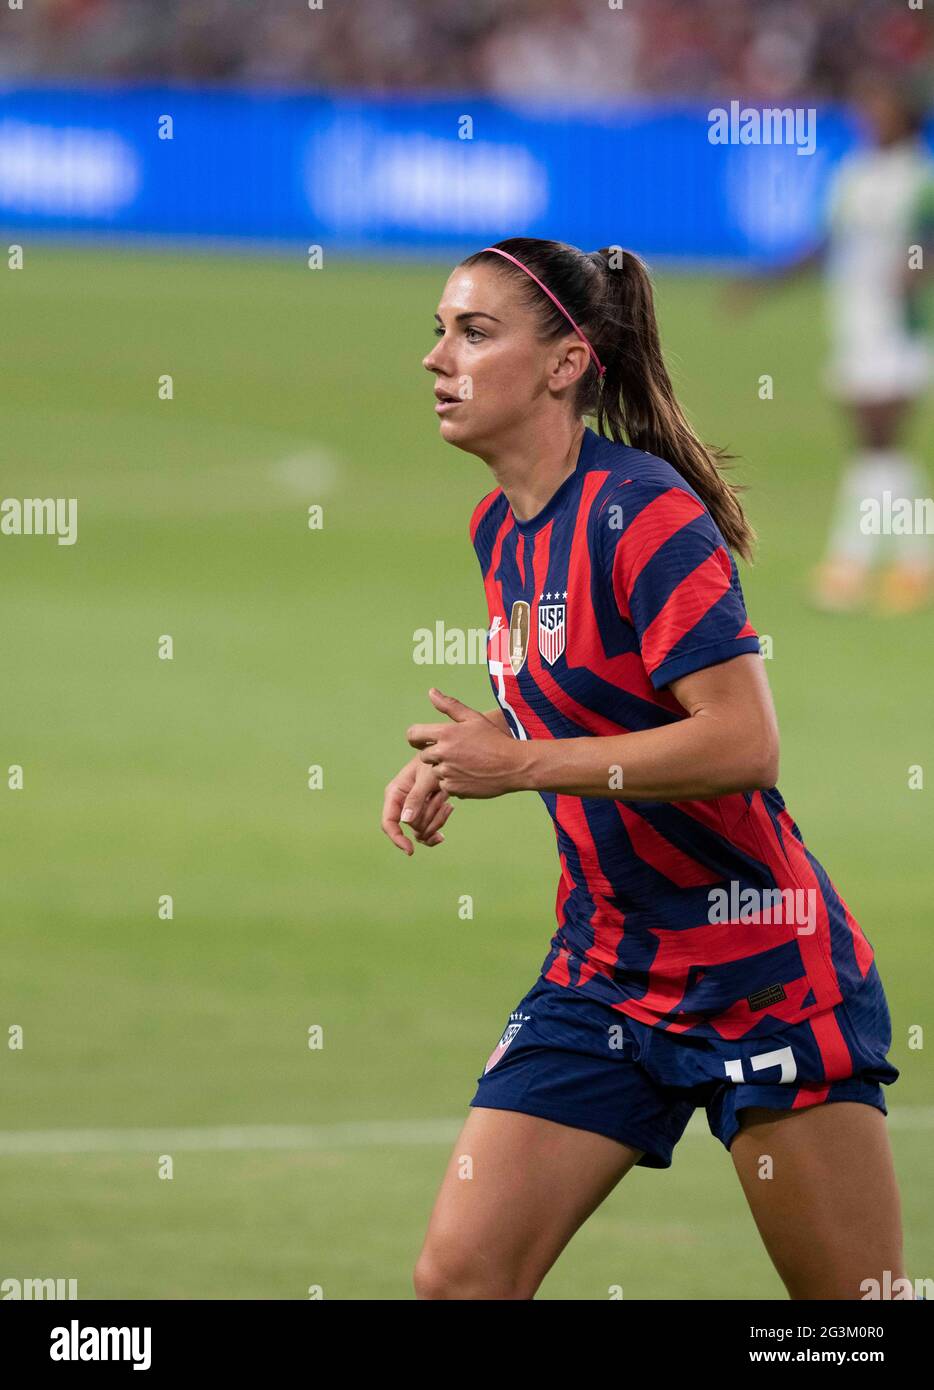 Austin, Texas, USA, June 16 2021: Austin, Texas, USA, June 16 2021: Veteran  forward ALEX MORGAN brings the ball downfield during the first half of the  US Women's National Team (USWNT) victory